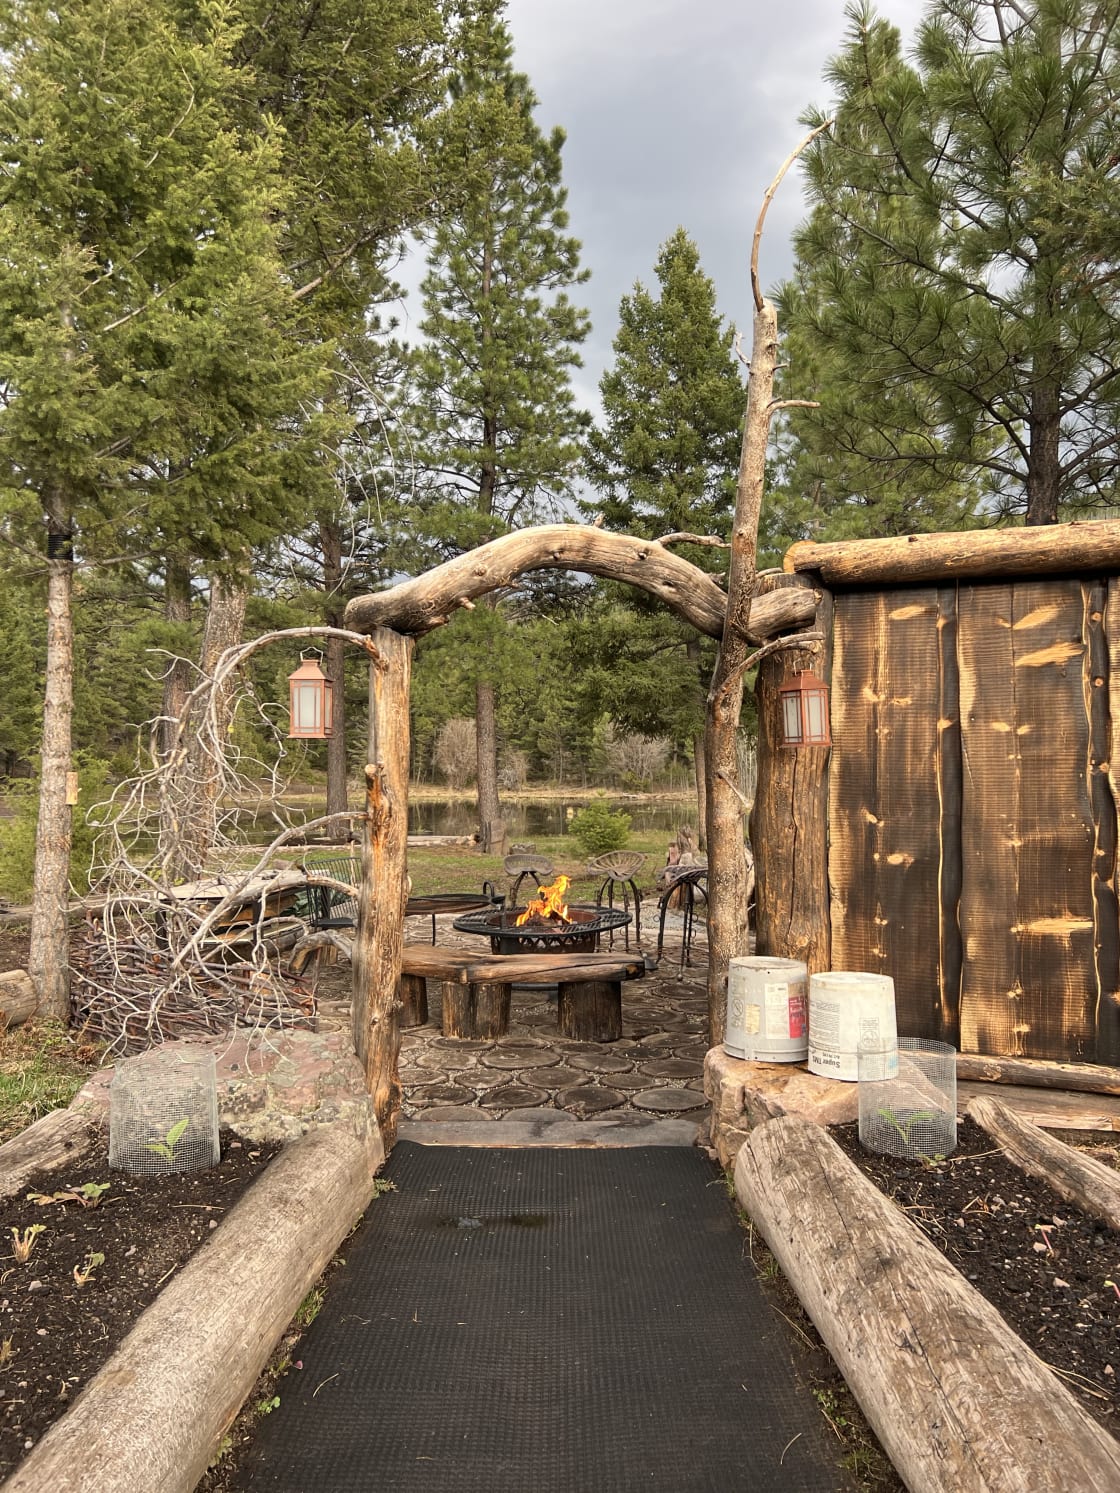 Shared fire pit area